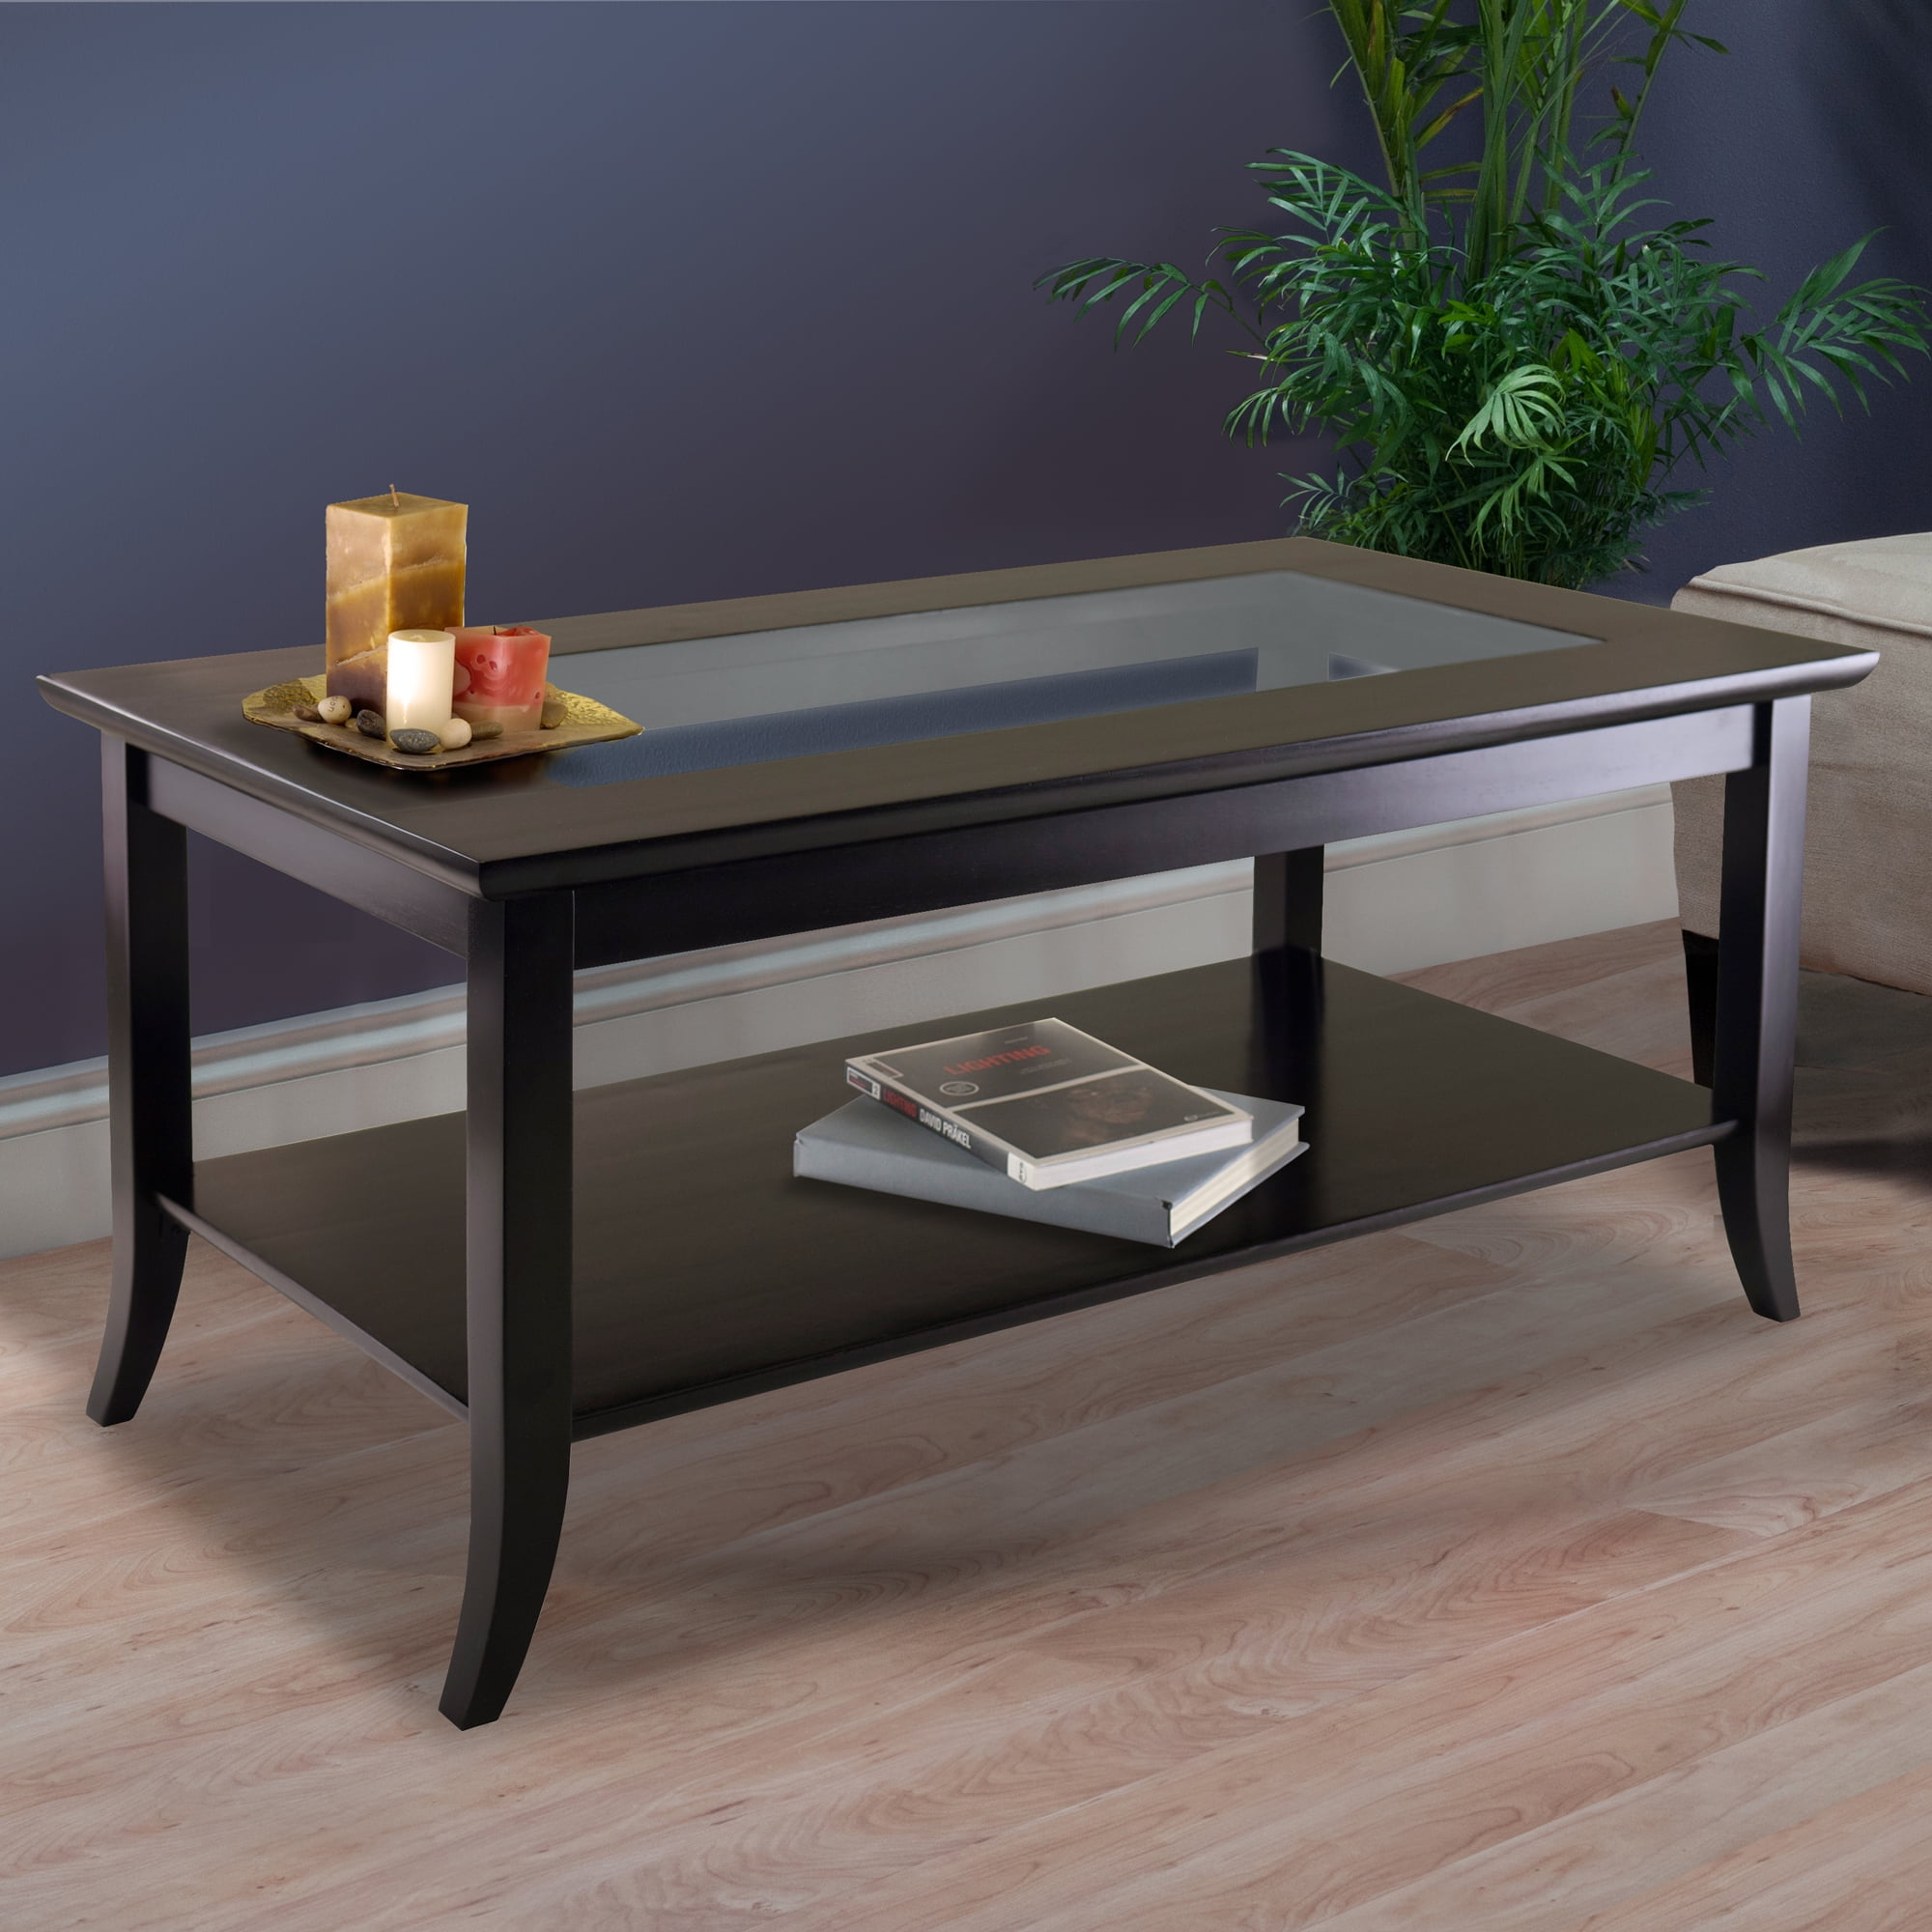 Espresso Winsome Genoa Rectangular Coffee Table with Glass Top and Shelf & Wood Genoa Occasional Table 